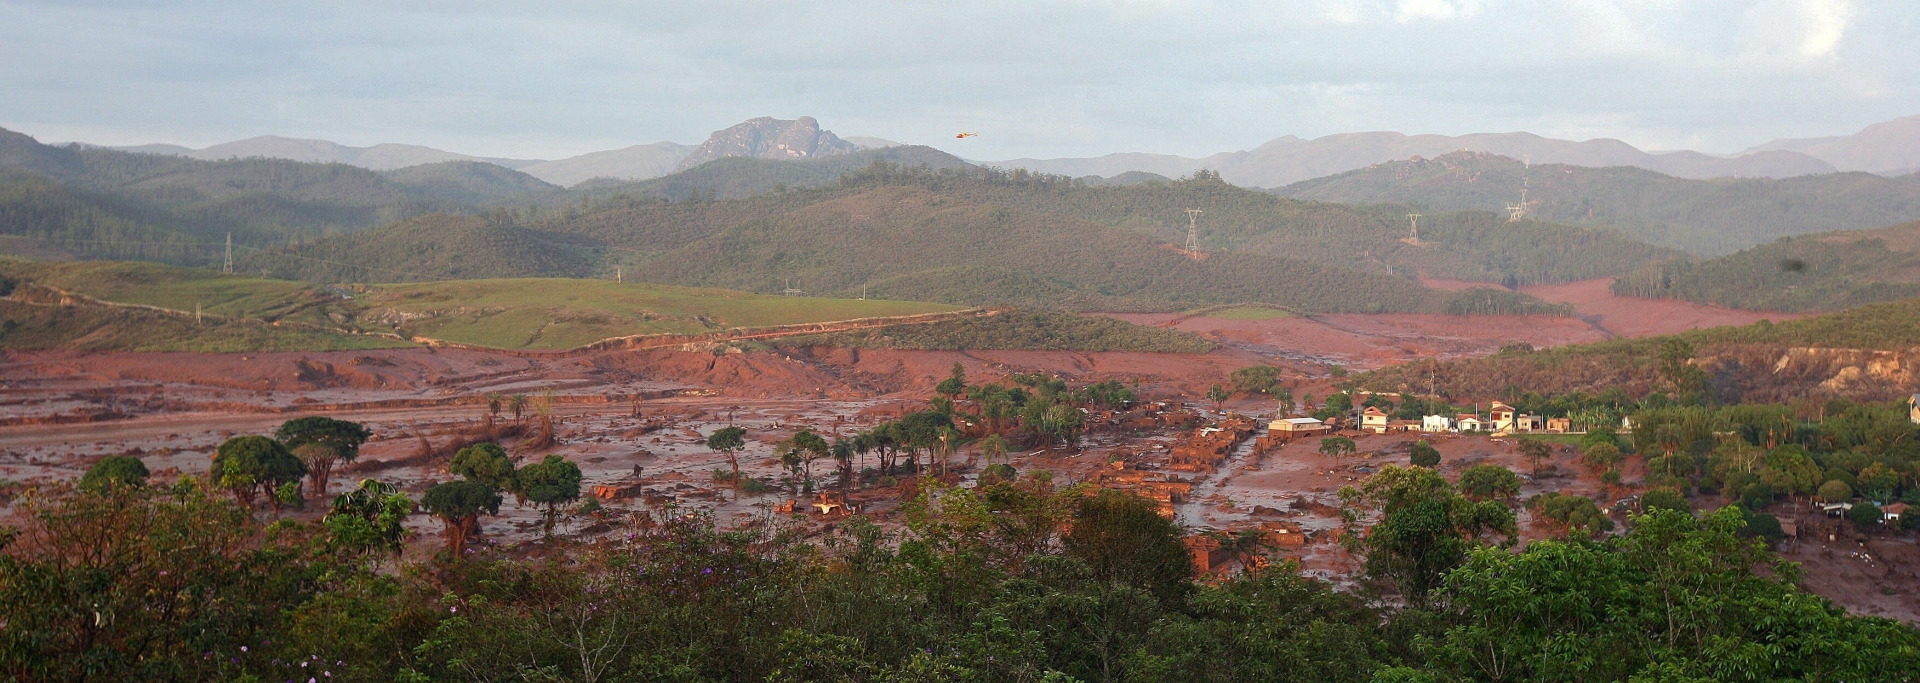 epa05014525 A general view of Bento Rodrigues locality after a retaining wall for an industrial waste dump collapsed in Minas Gerais, Brazil, 06 November 2015. At least eight people died, 43 were injured and an unknown number are still missing after a barrier at a huge waste deposit in a mining complex in the Brazilian state of Minas Gerais ruptured, local media and emergency organizations reported.  EPA/NENO VIANNA BRAZIL ACCIDENT